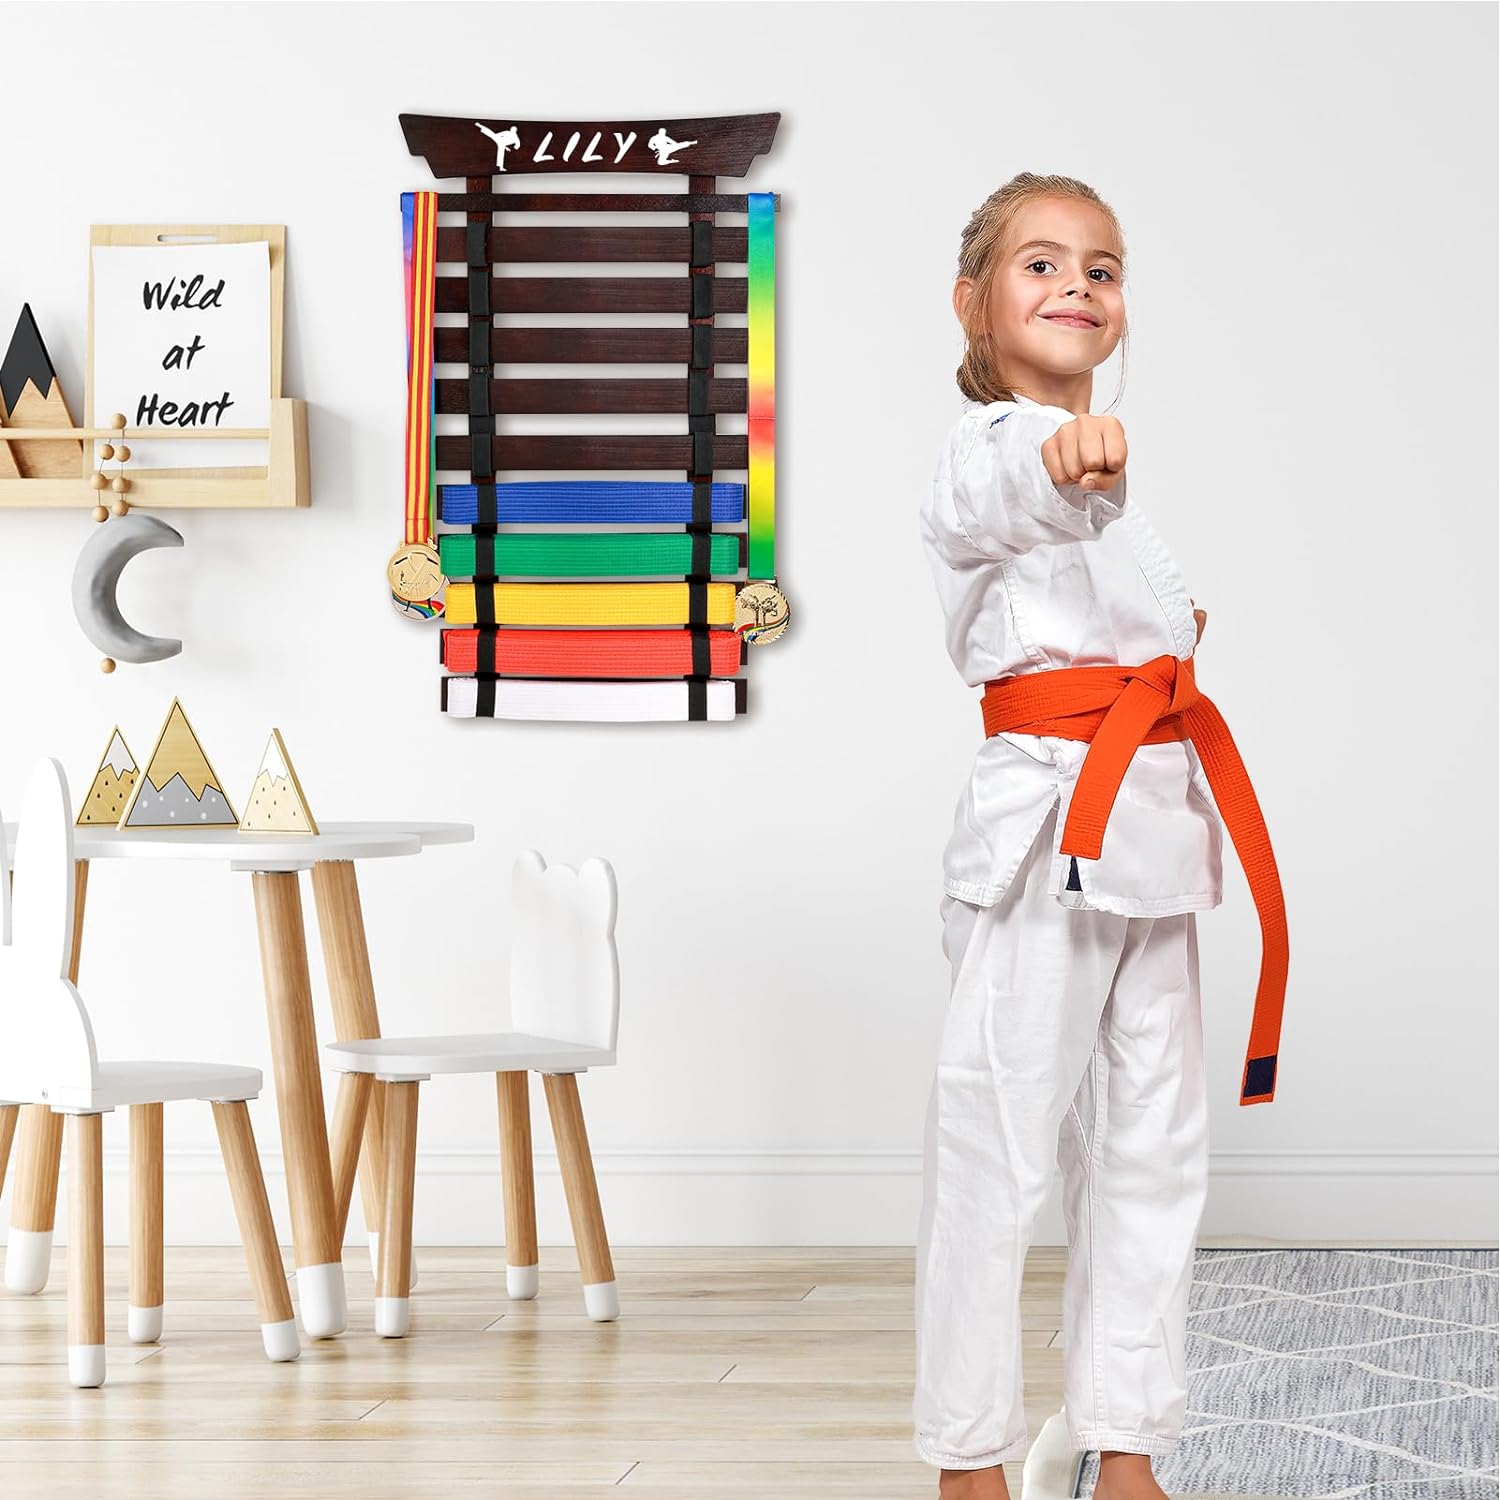 Eclipse Martial Art Supplies sporting goods 10 Belts Karate Belt Display Rack with Stickers, Taekwondo Belt Display Holder, Martial Arts Belt Display, No Assembly Required, BJJ Hanging Holder for Kids and Adult